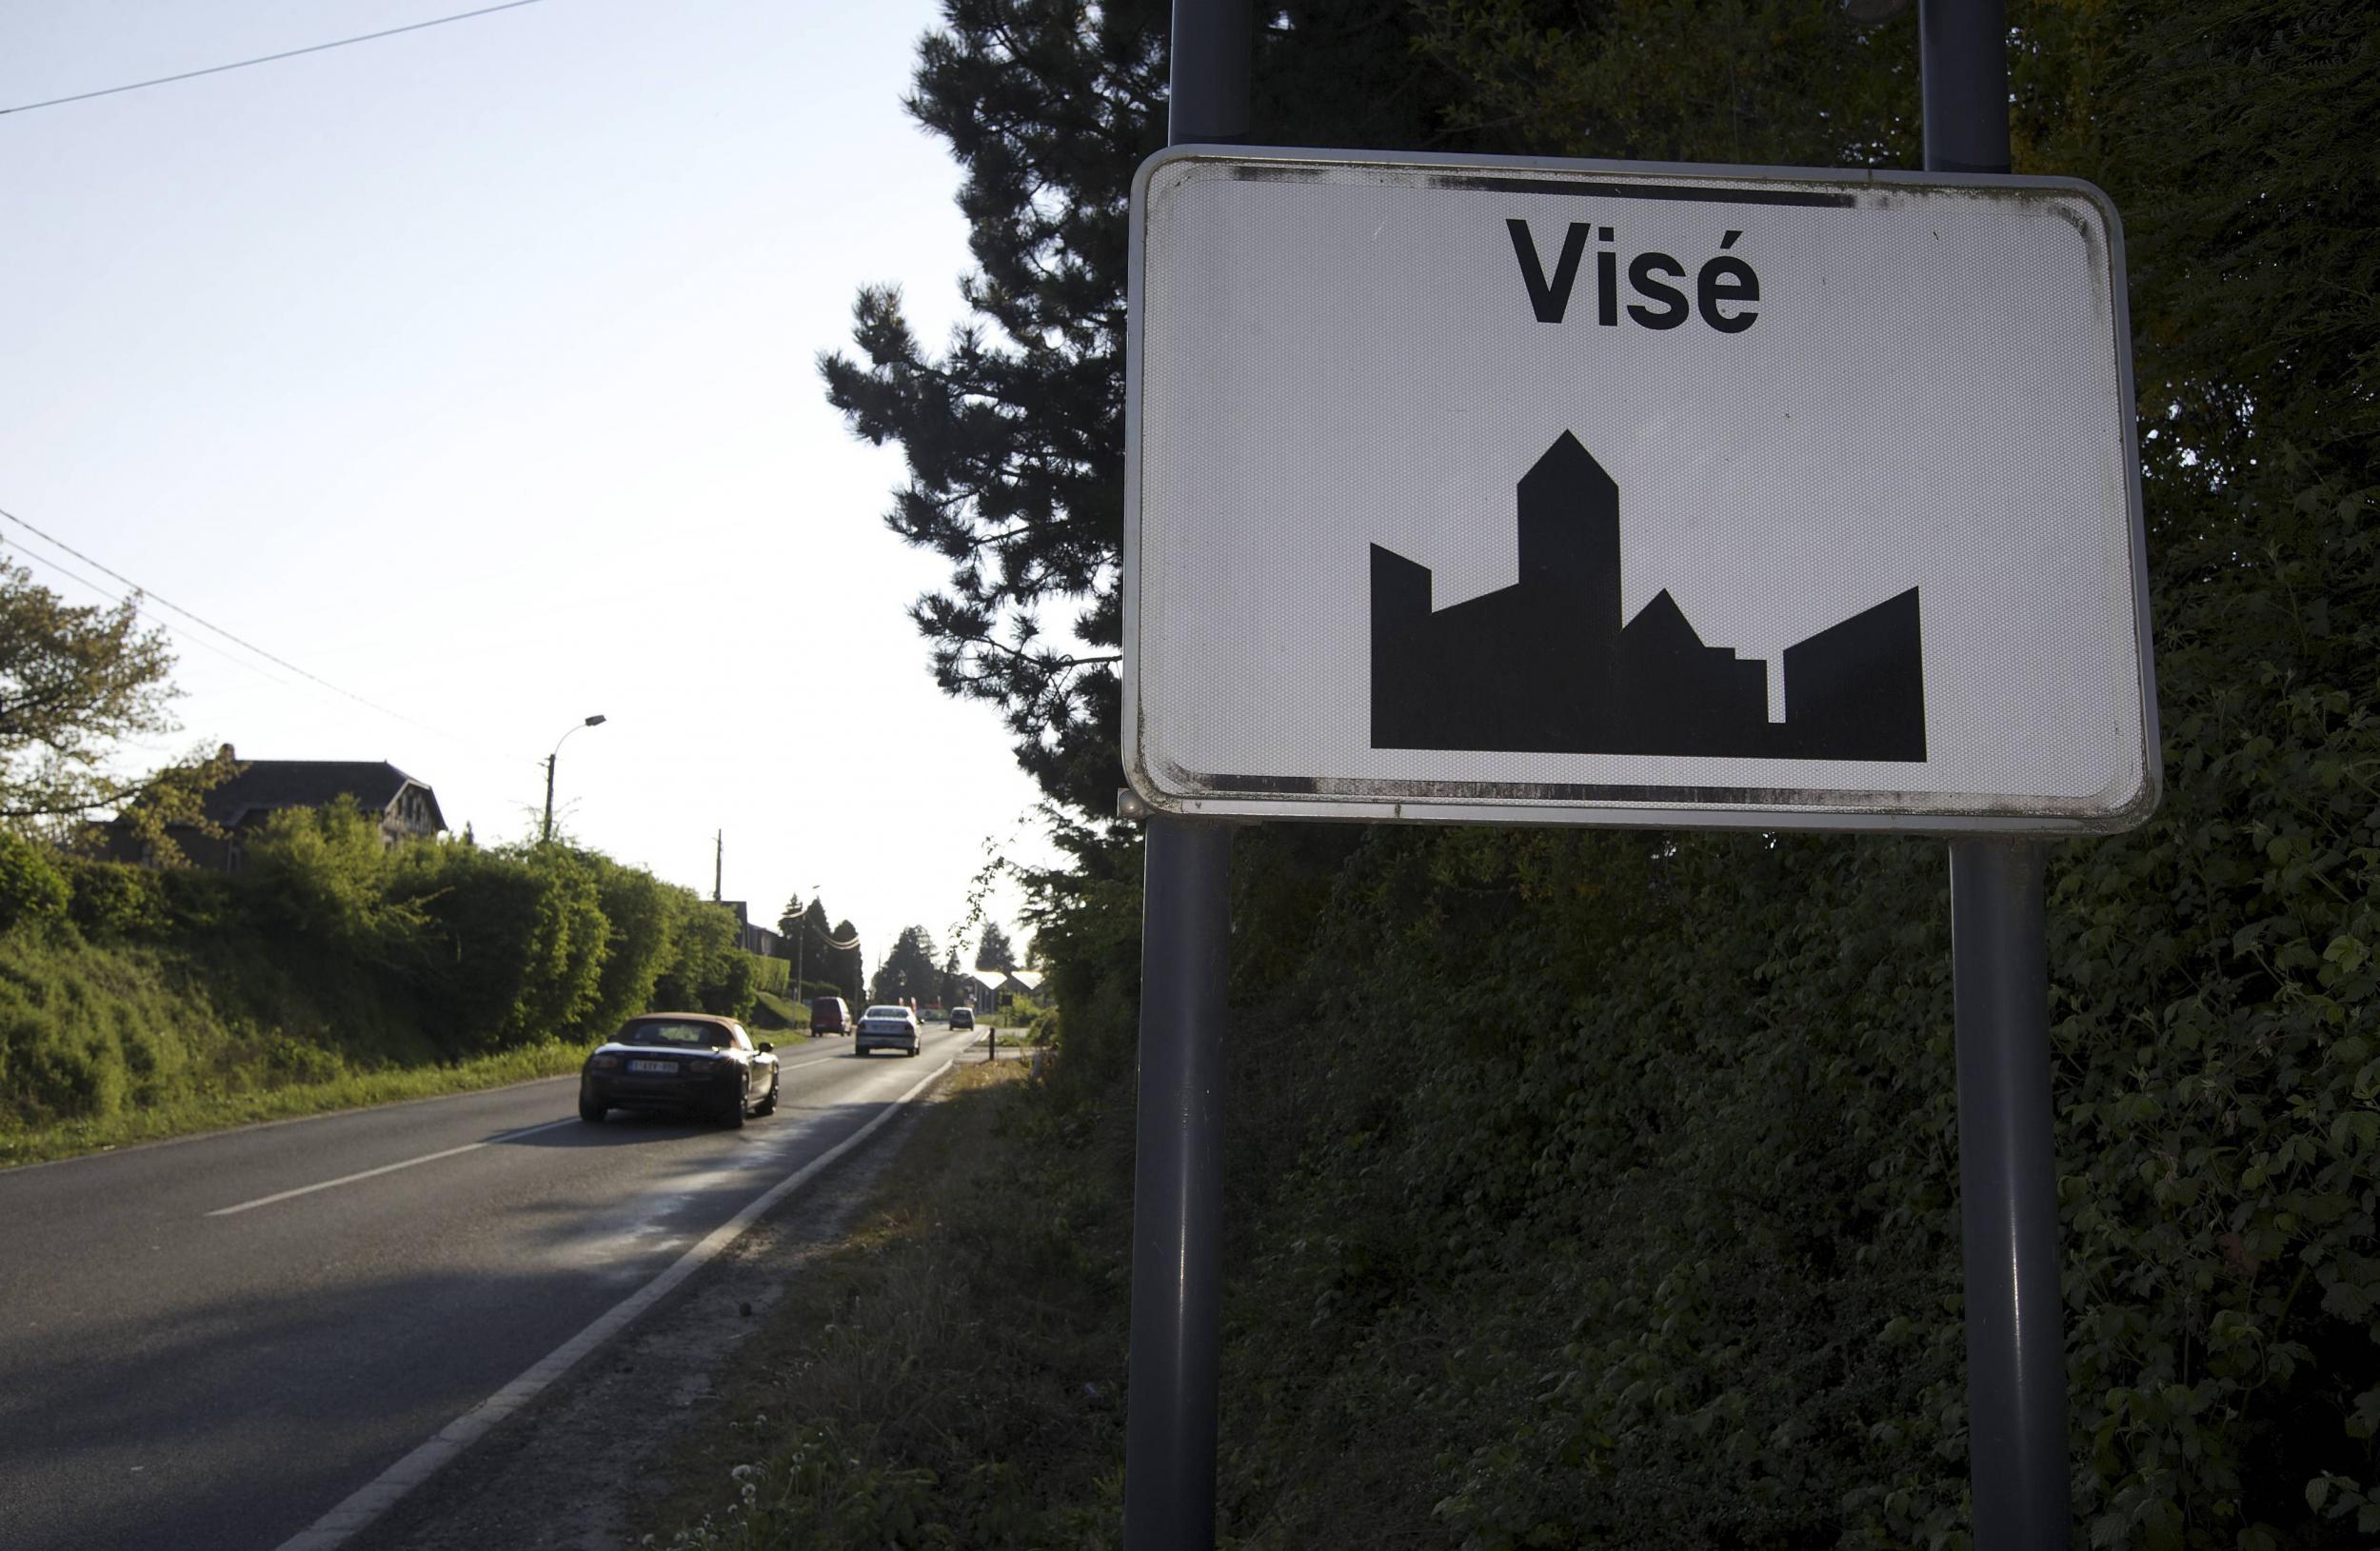 The border change is near the Belgian town of Vise